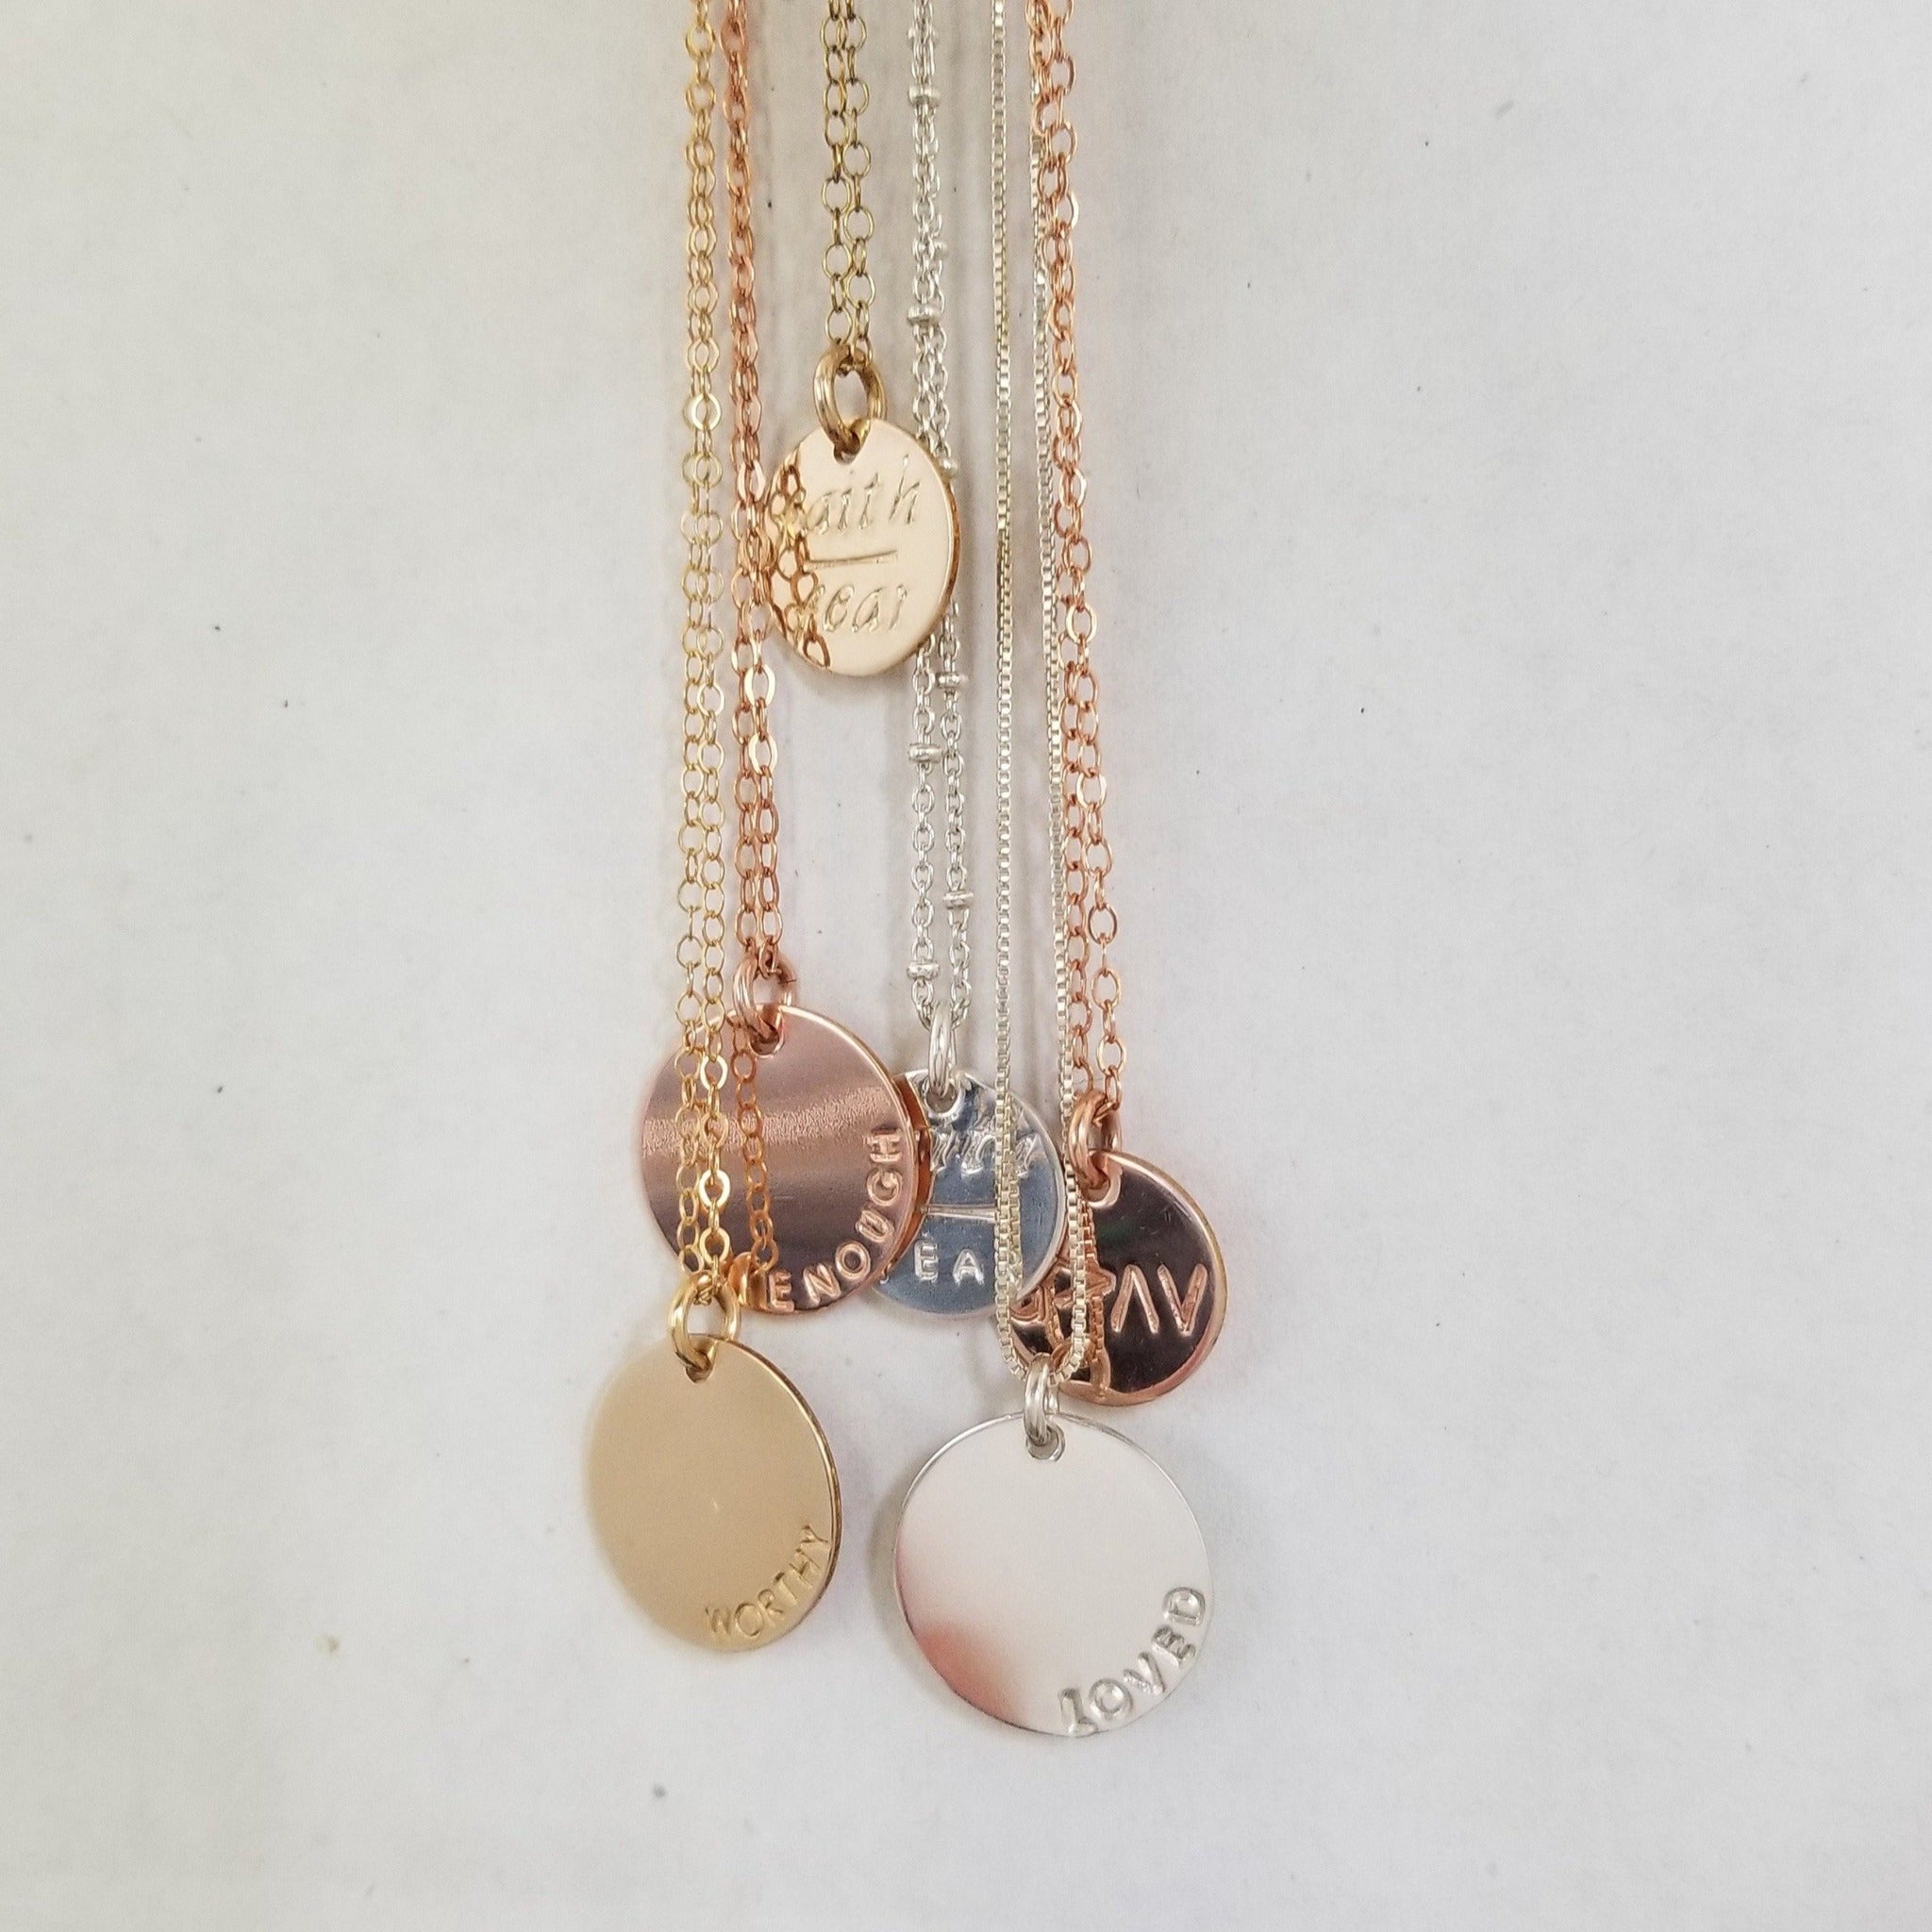 Add On Charm - Round - All Sizes - Sterling, Gold or Rose Gold